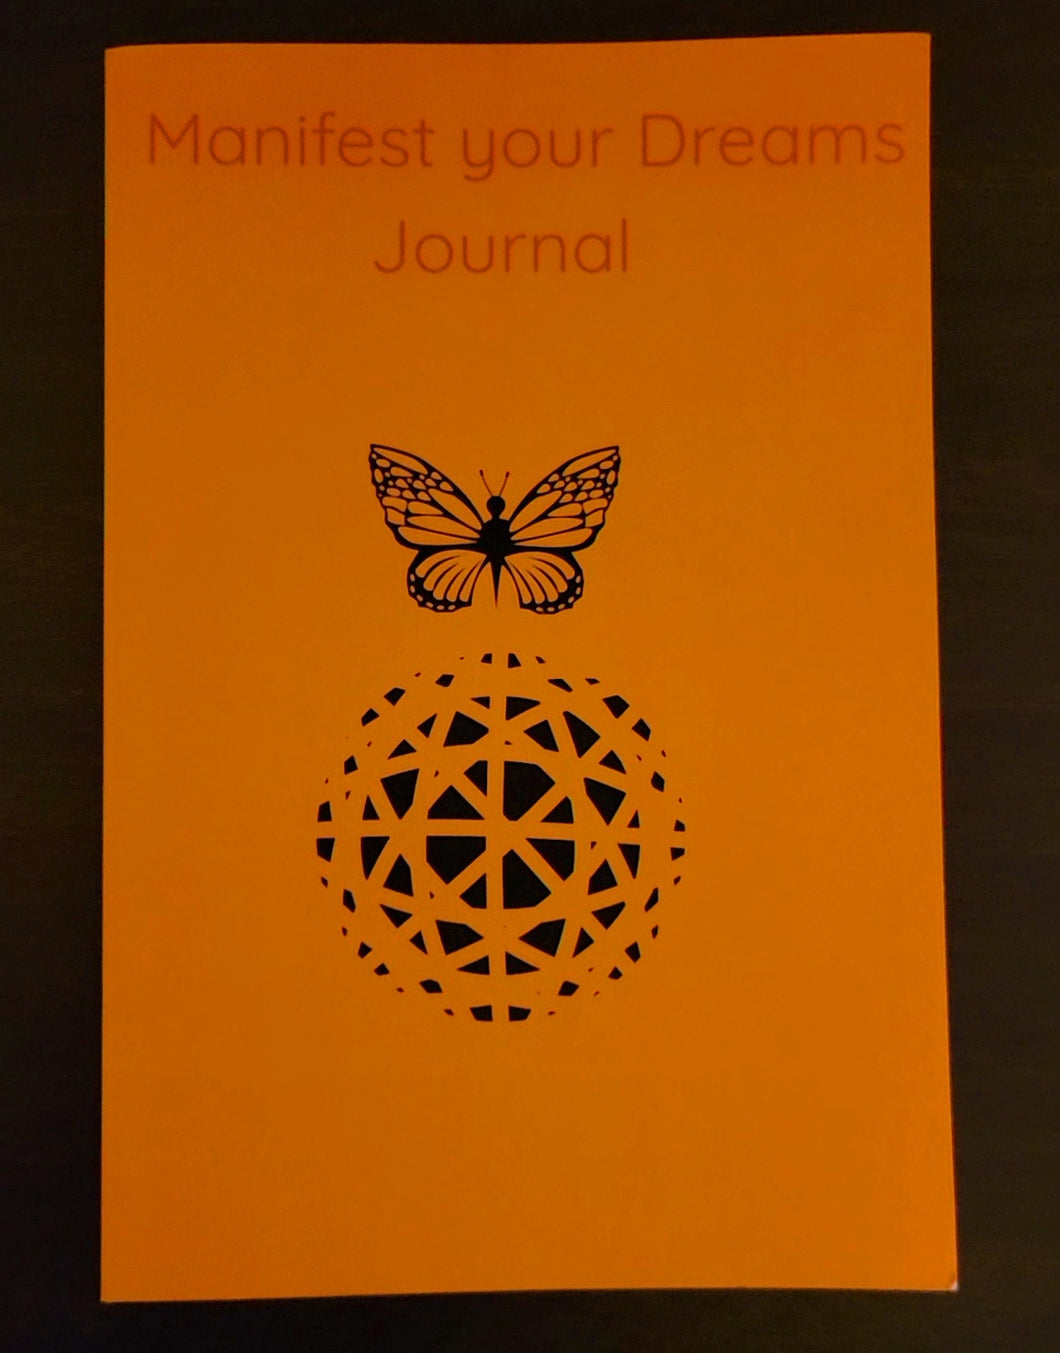 Manifest your dreams journal